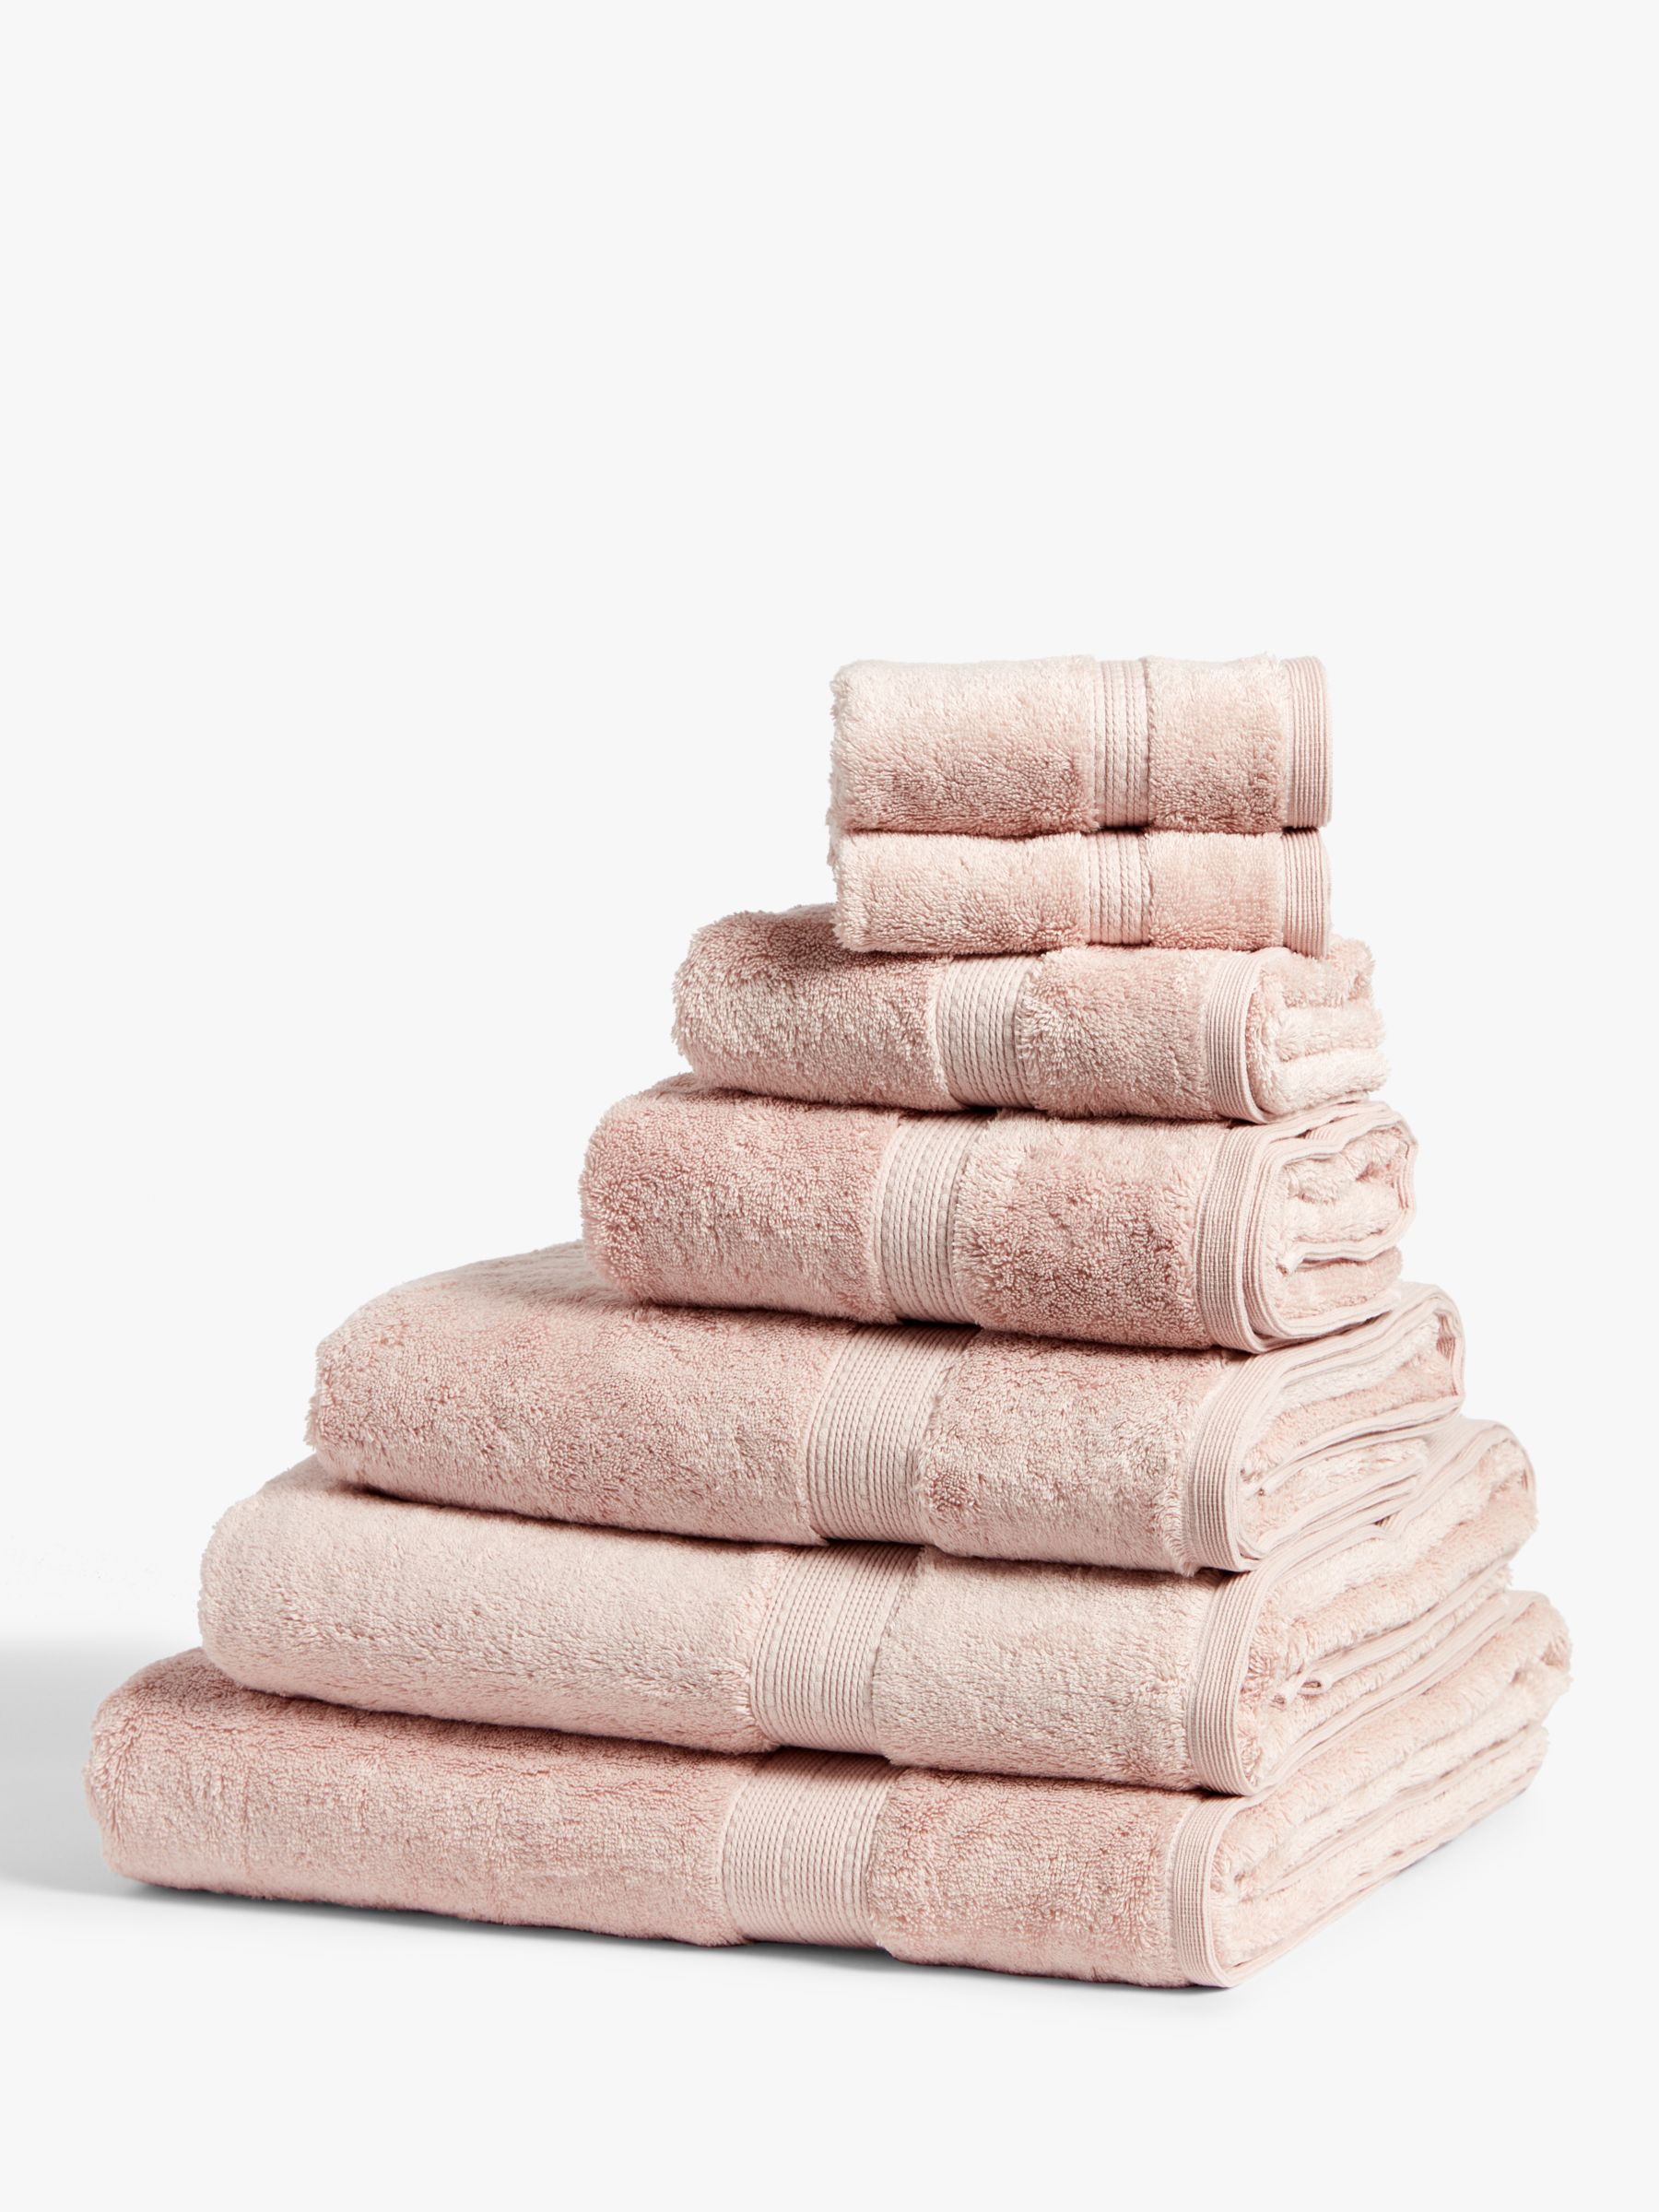 John Lewis Ultimate Hotel Cotton Towels, Pale Pink